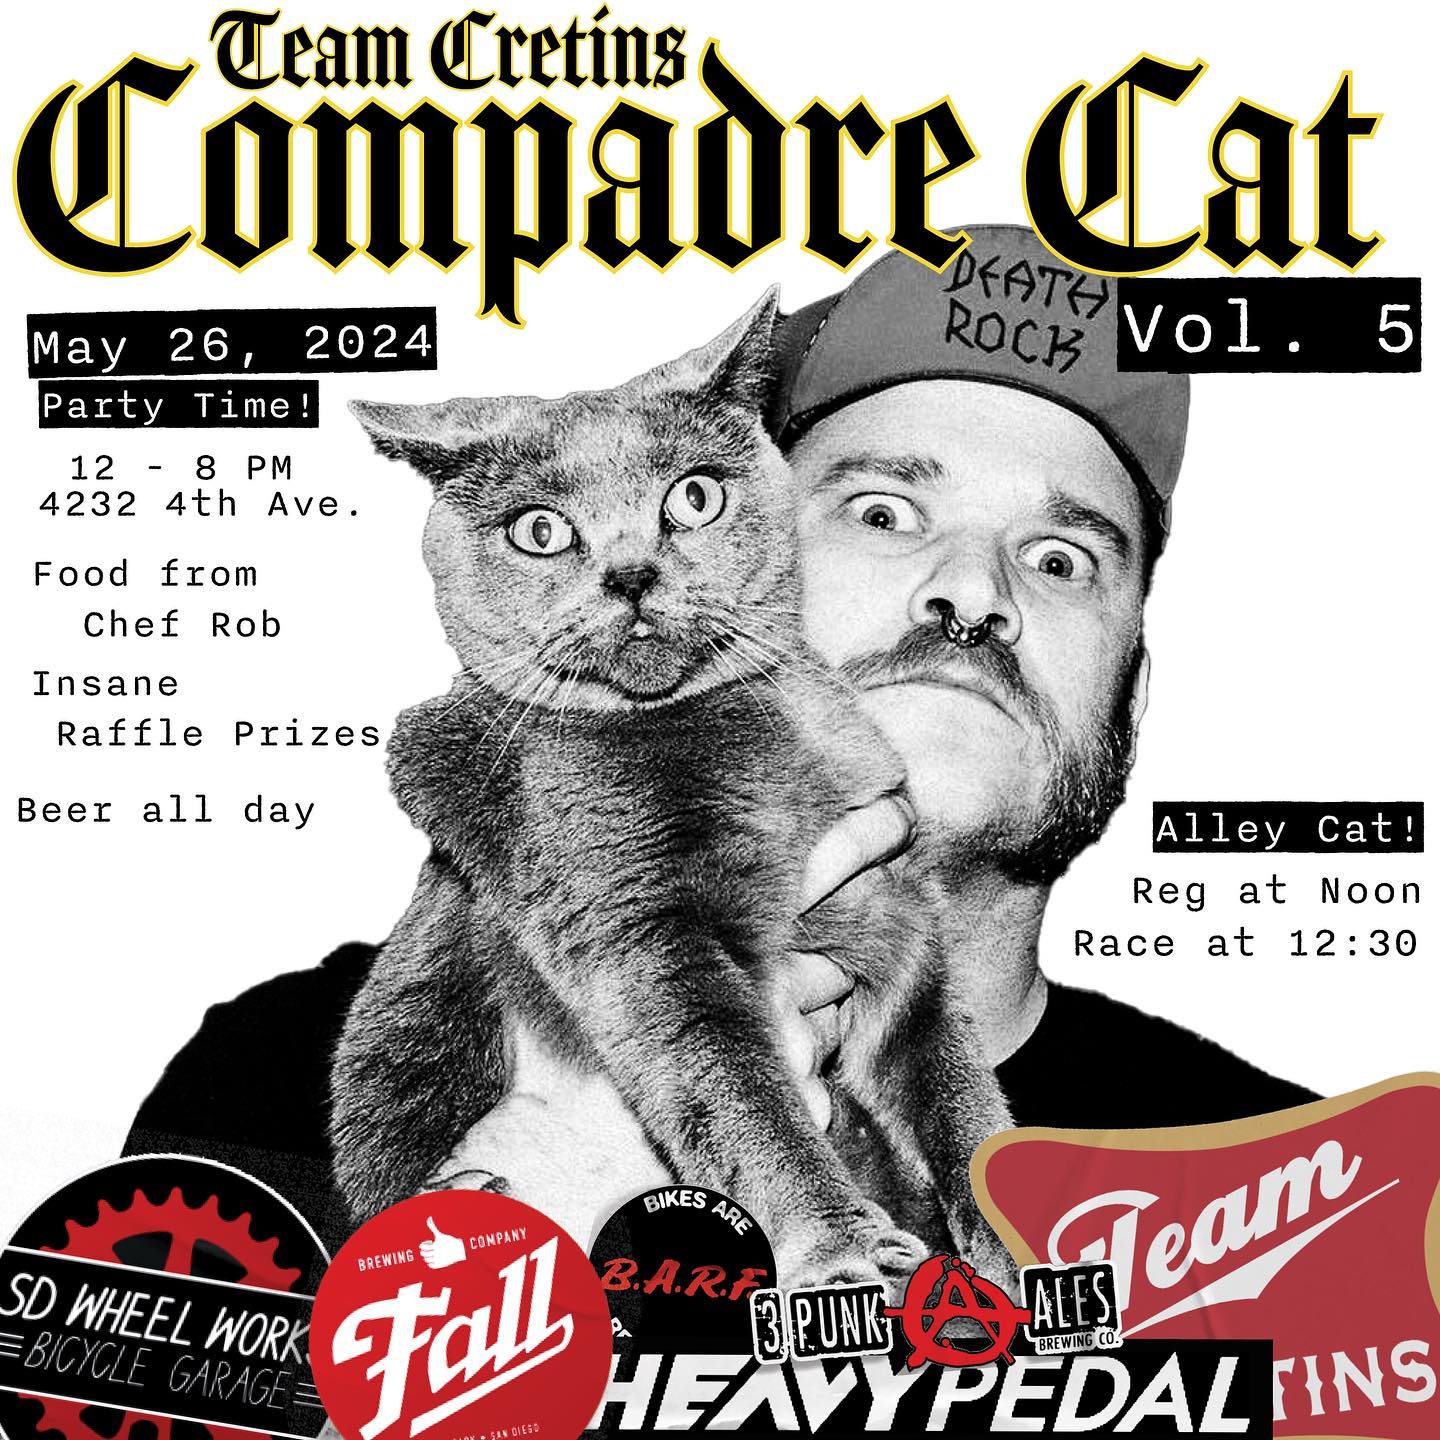 Compadre Cat 5, a Team Cretins Fundraiser + Team Alley Cat, Presented by B.A.R.F.